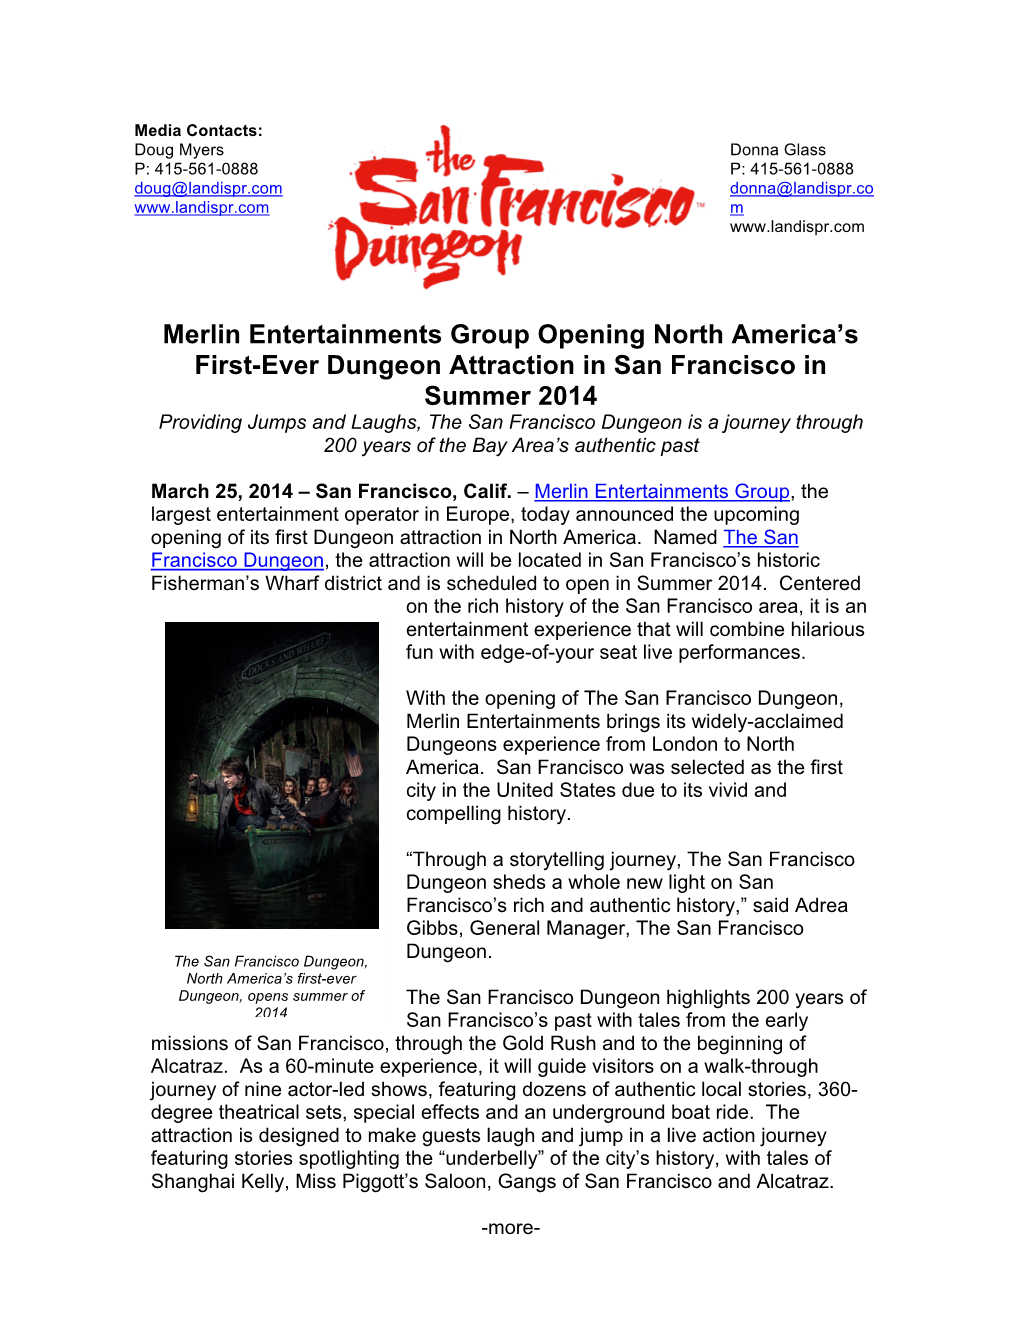 Merlin Entertainments Group Opening North America's First-Ever